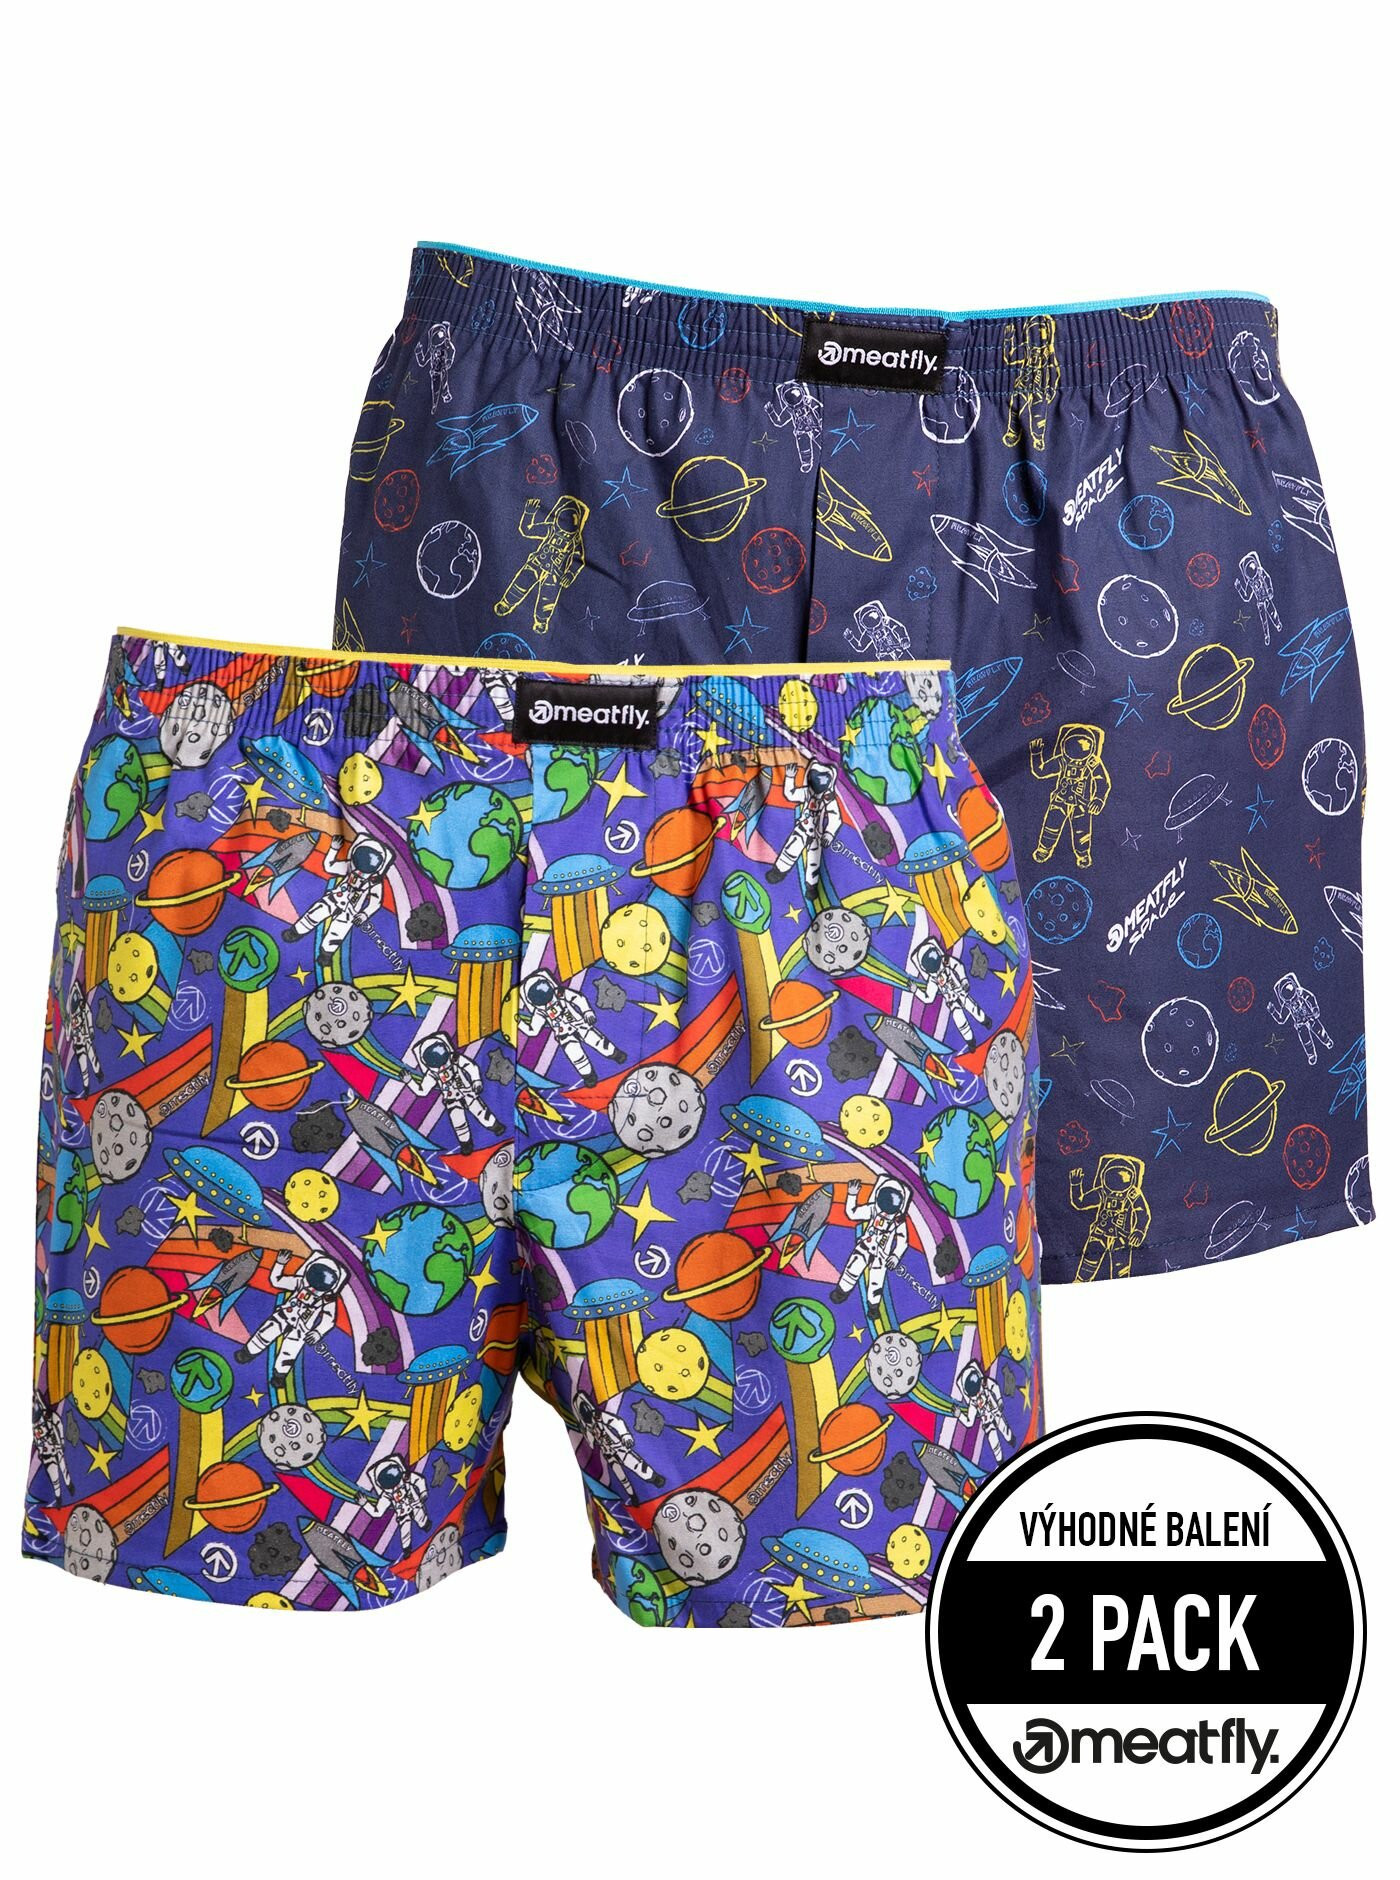 2PACK men's shorts Meatfly multicolored (Agostino - cosmo)